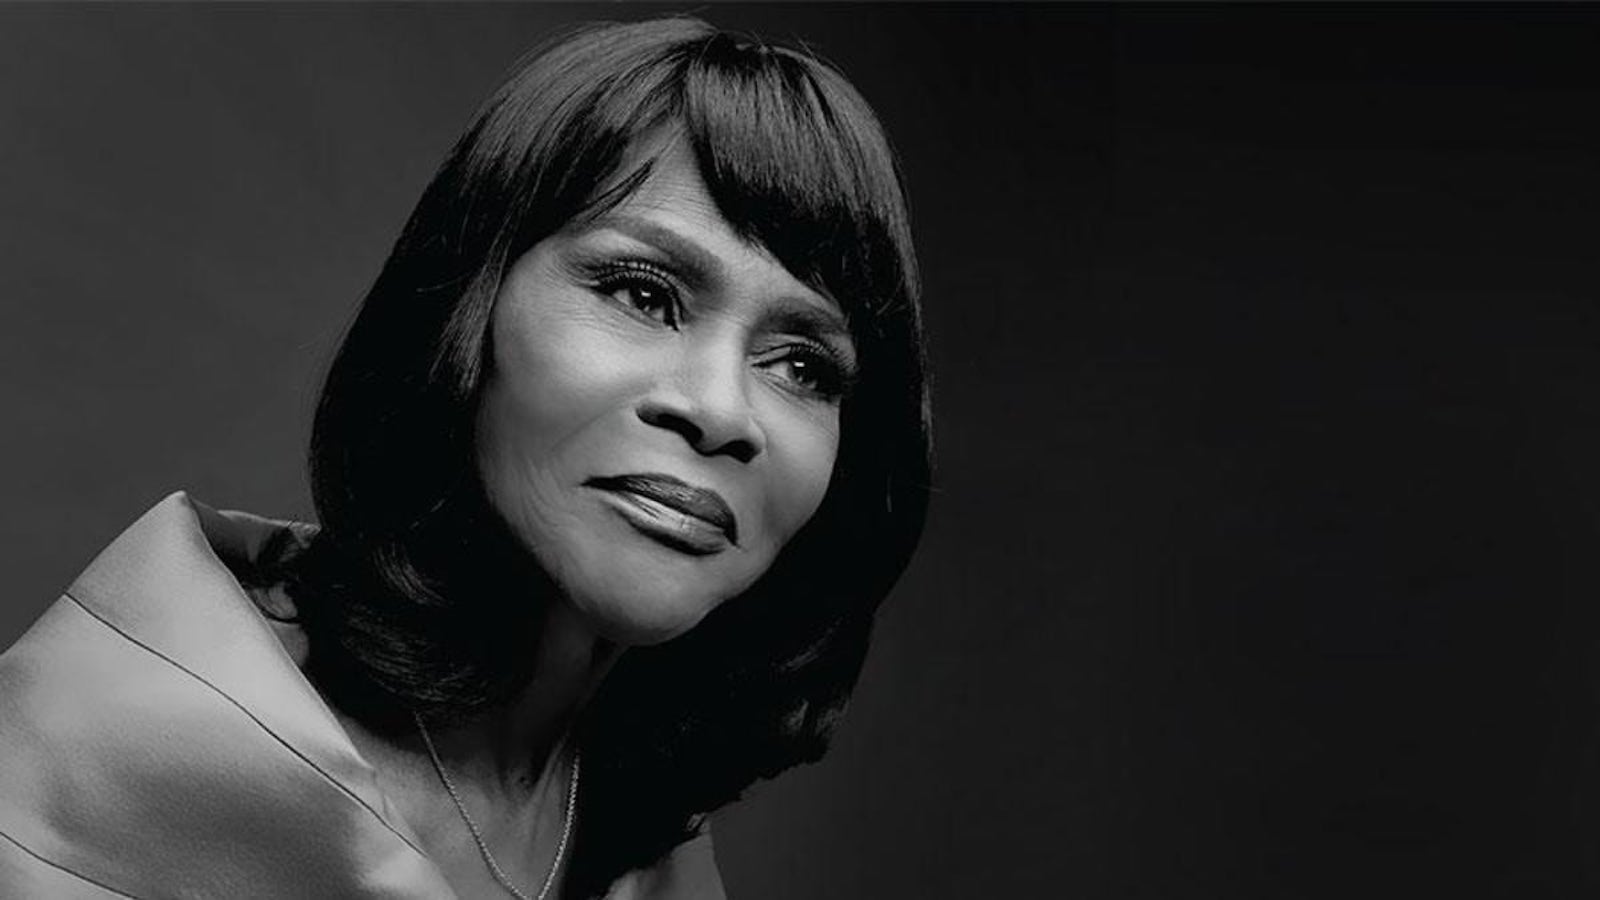 Cicely Tyson, Cherish The Day, Fall From Grace, African American Actress, Black Actress, African American Film, Black Film, KOLUMN Magazine, KOLUMN, KINDR'D Magazine, KINDR'D, Willoughby Avenue, Wriit,